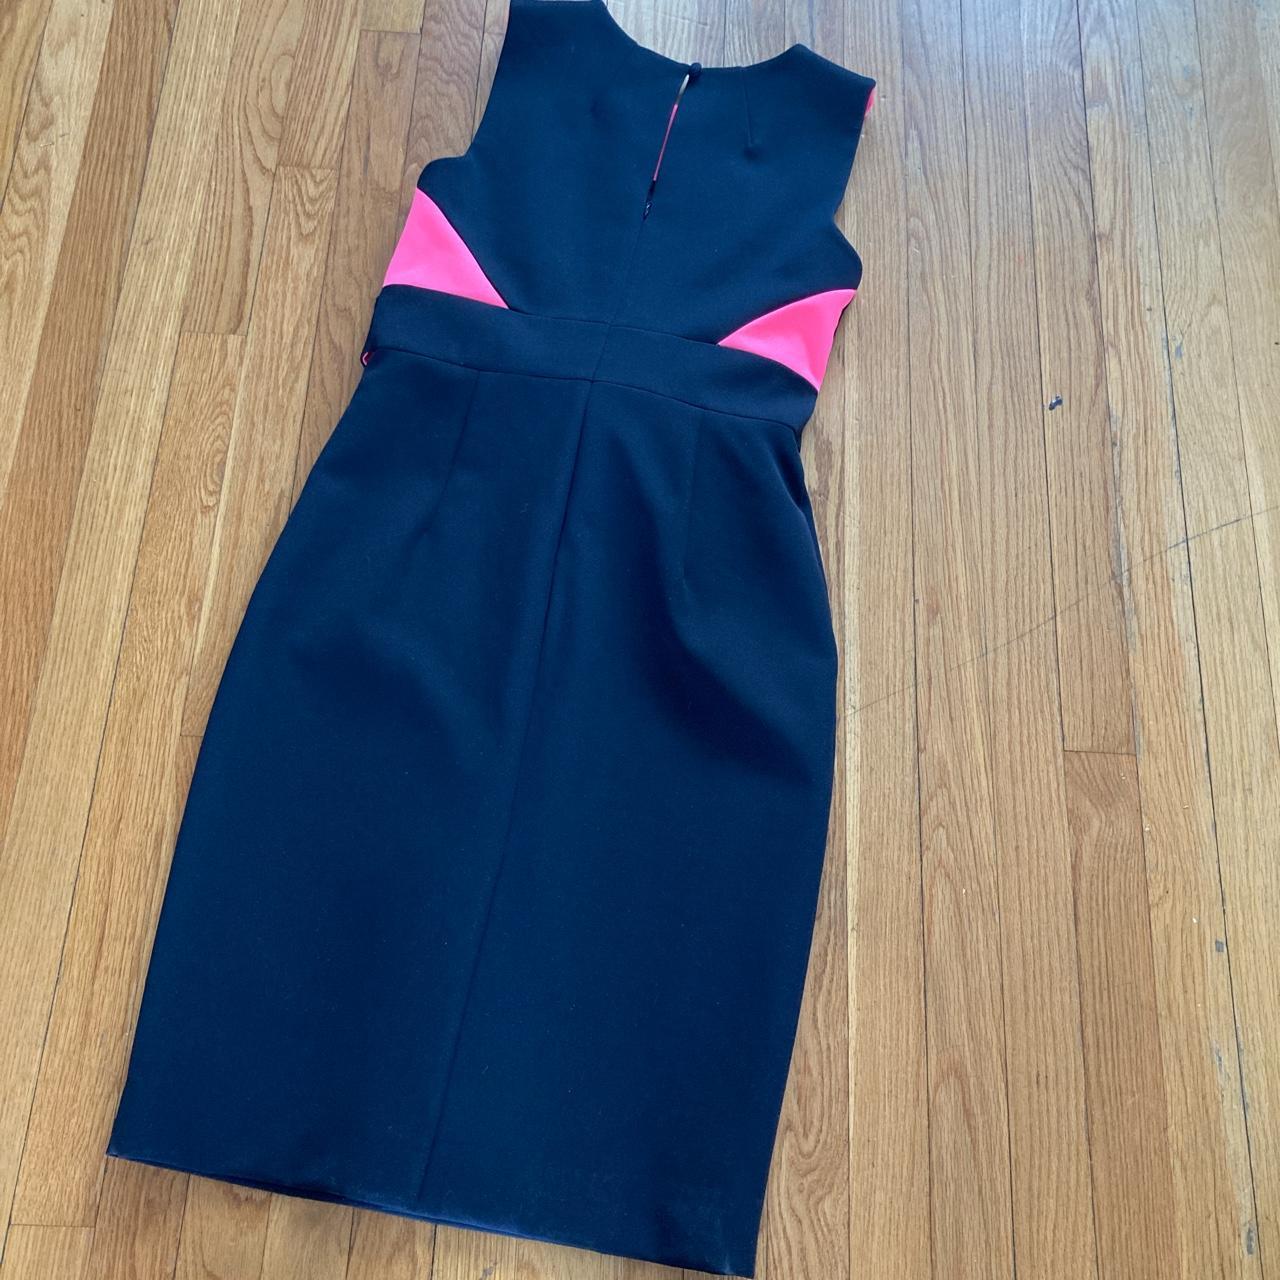 Milly Women's Pink and Black Dress | Depop